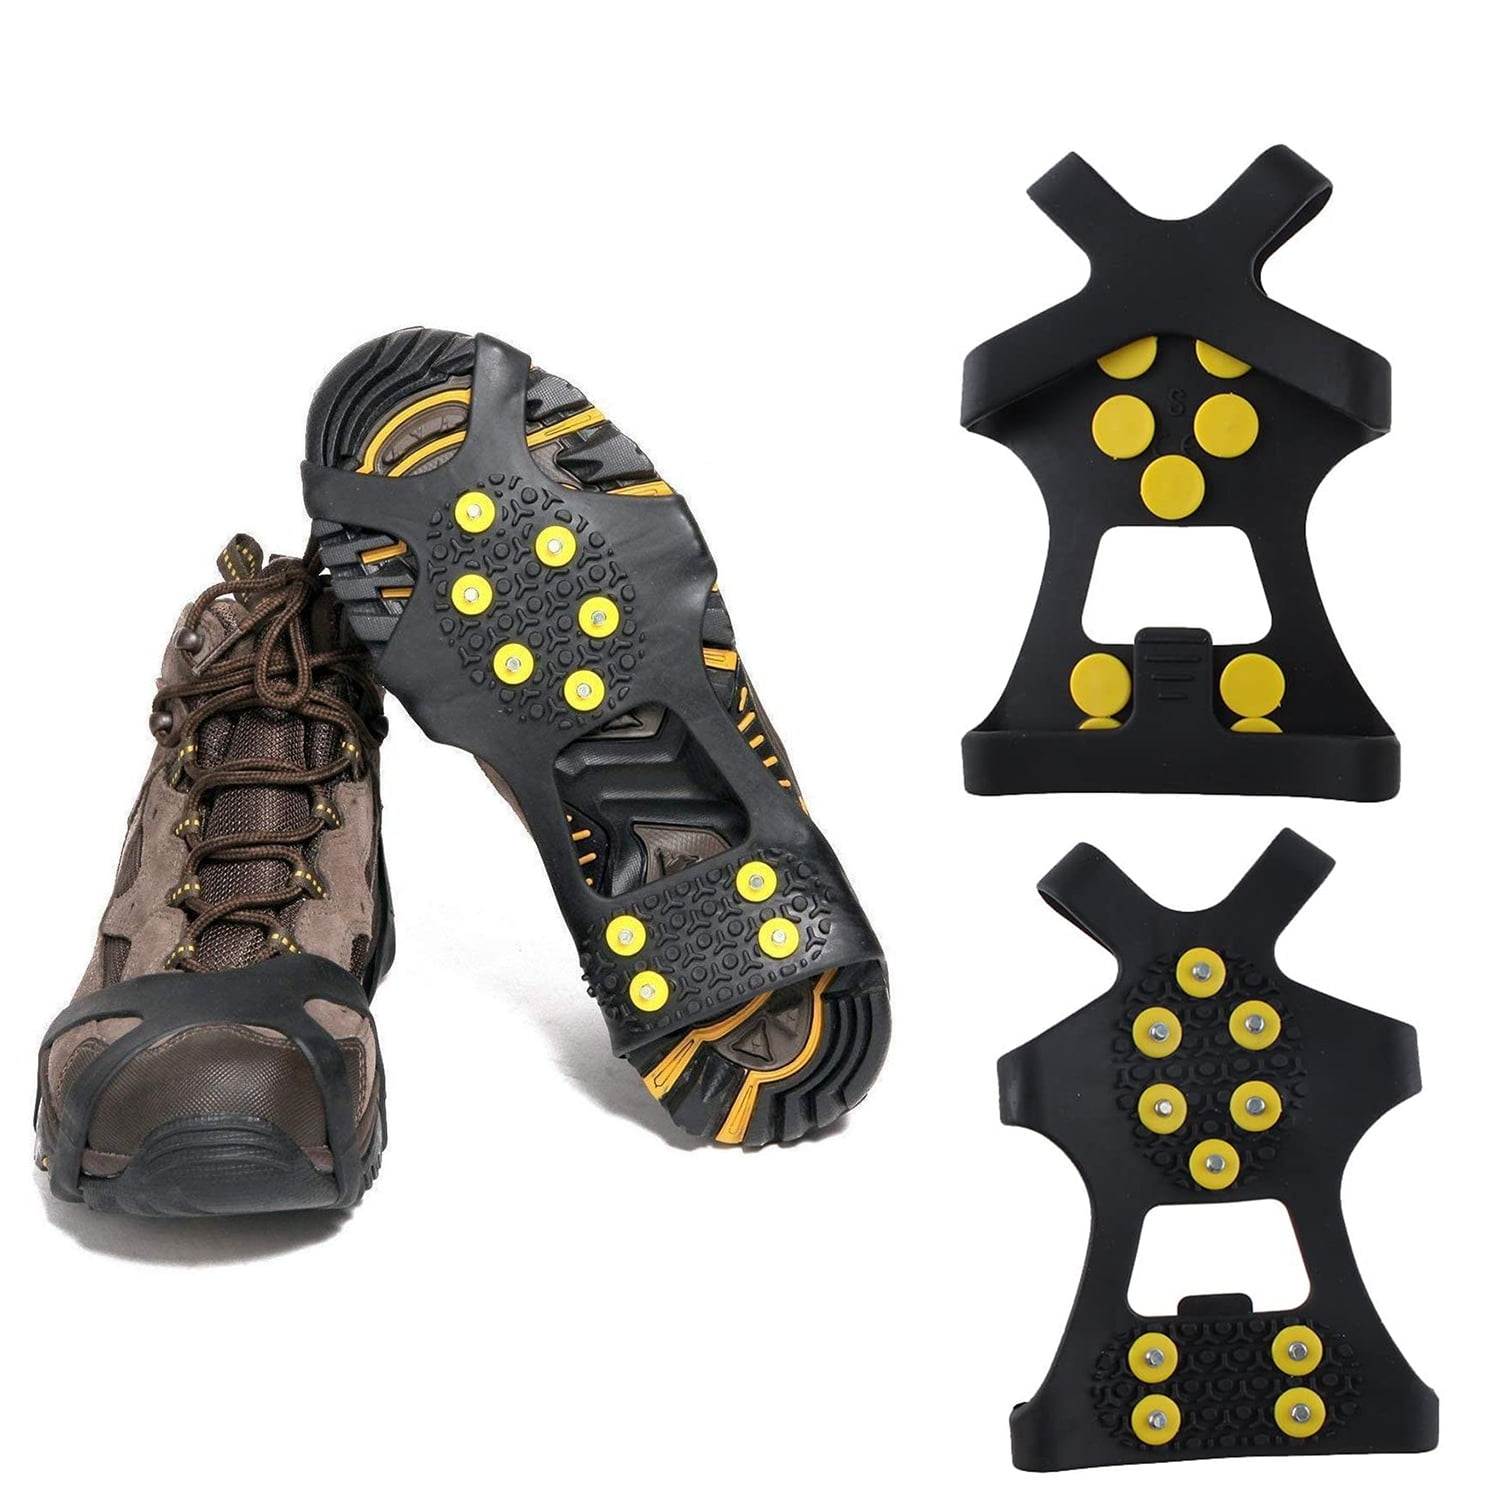 Ice Snow Grips Non Slip On Over shoe Boot Studs Crampons Cleats Spikes Grippers 